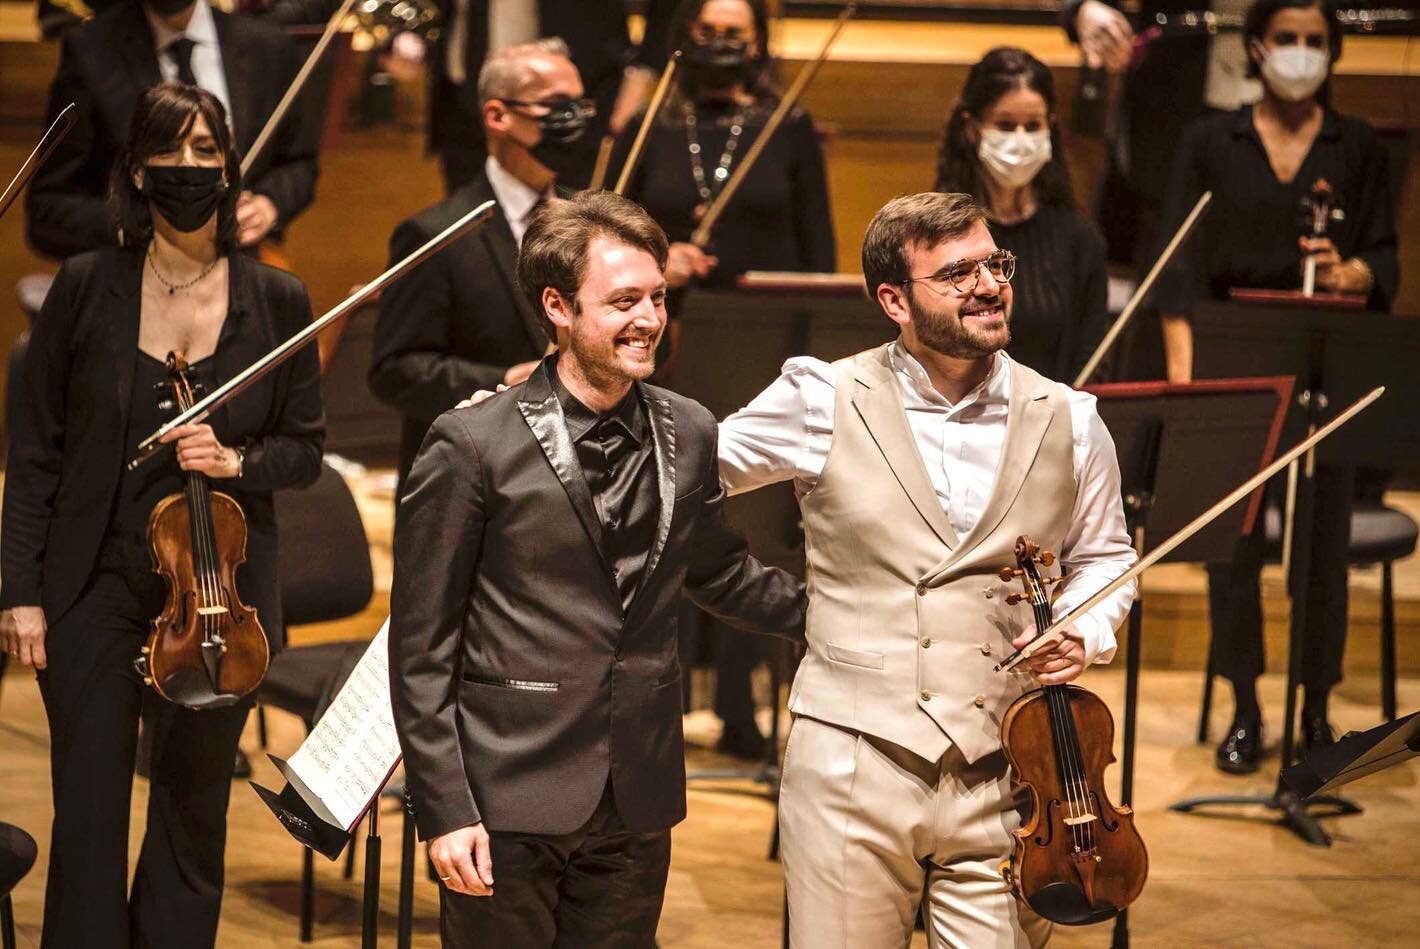 Last week's mozart with my friend @alessandrobonato 🤍
Thank you @ipomeriggimusicali_official 

#music #violin #mozart #elegance #concert #milano #orchestra